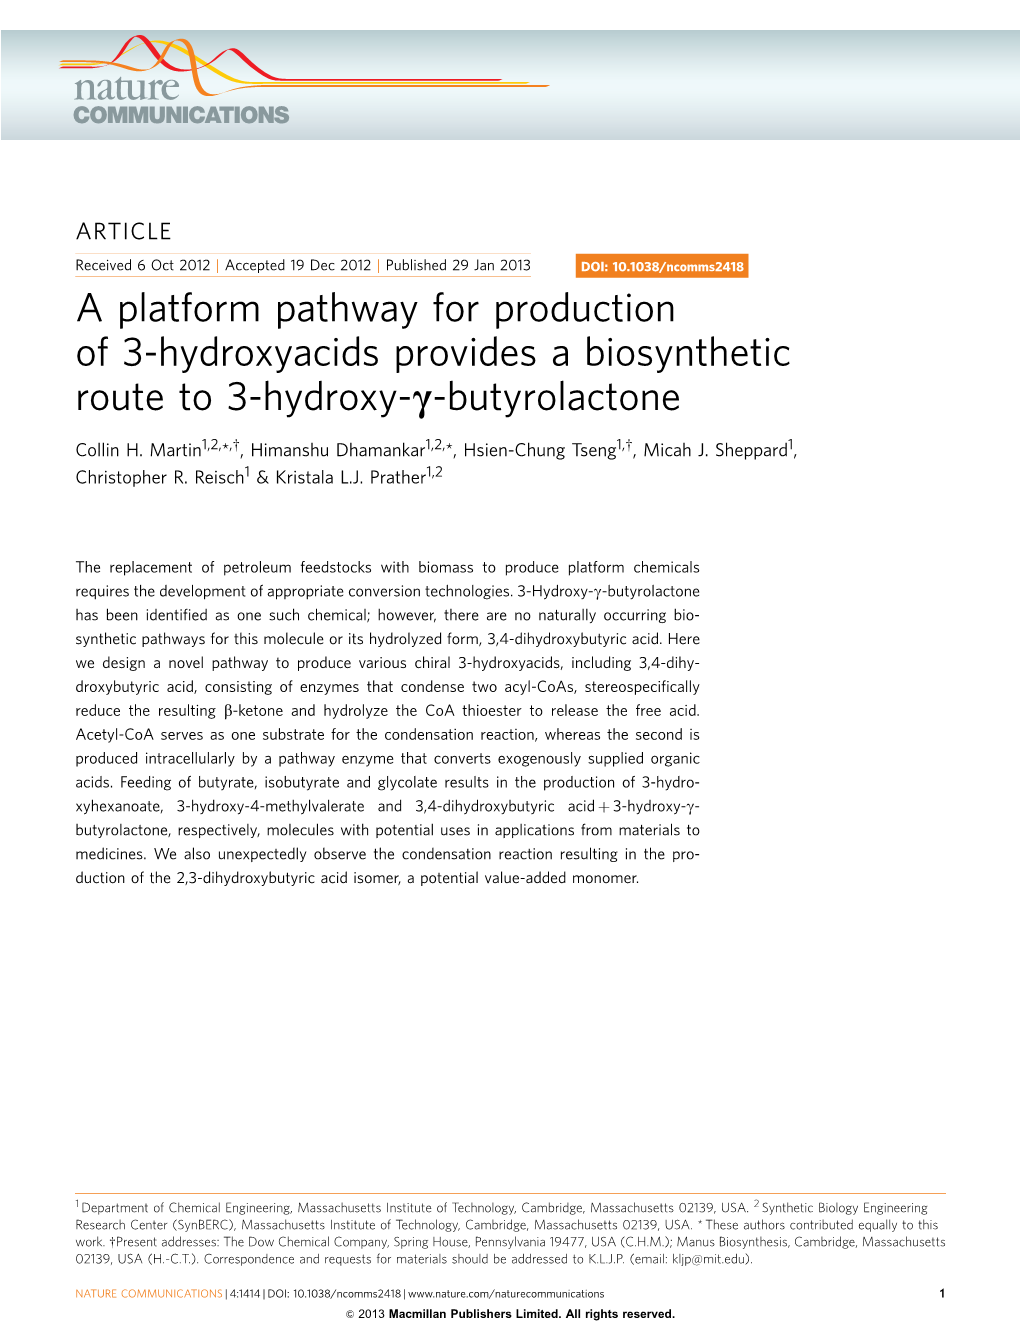 A Platform Pathway for Production of 3-Hydroxyacids Provides a Biosynthetic Route to 3-Hydroxy-C-Butyrolactone